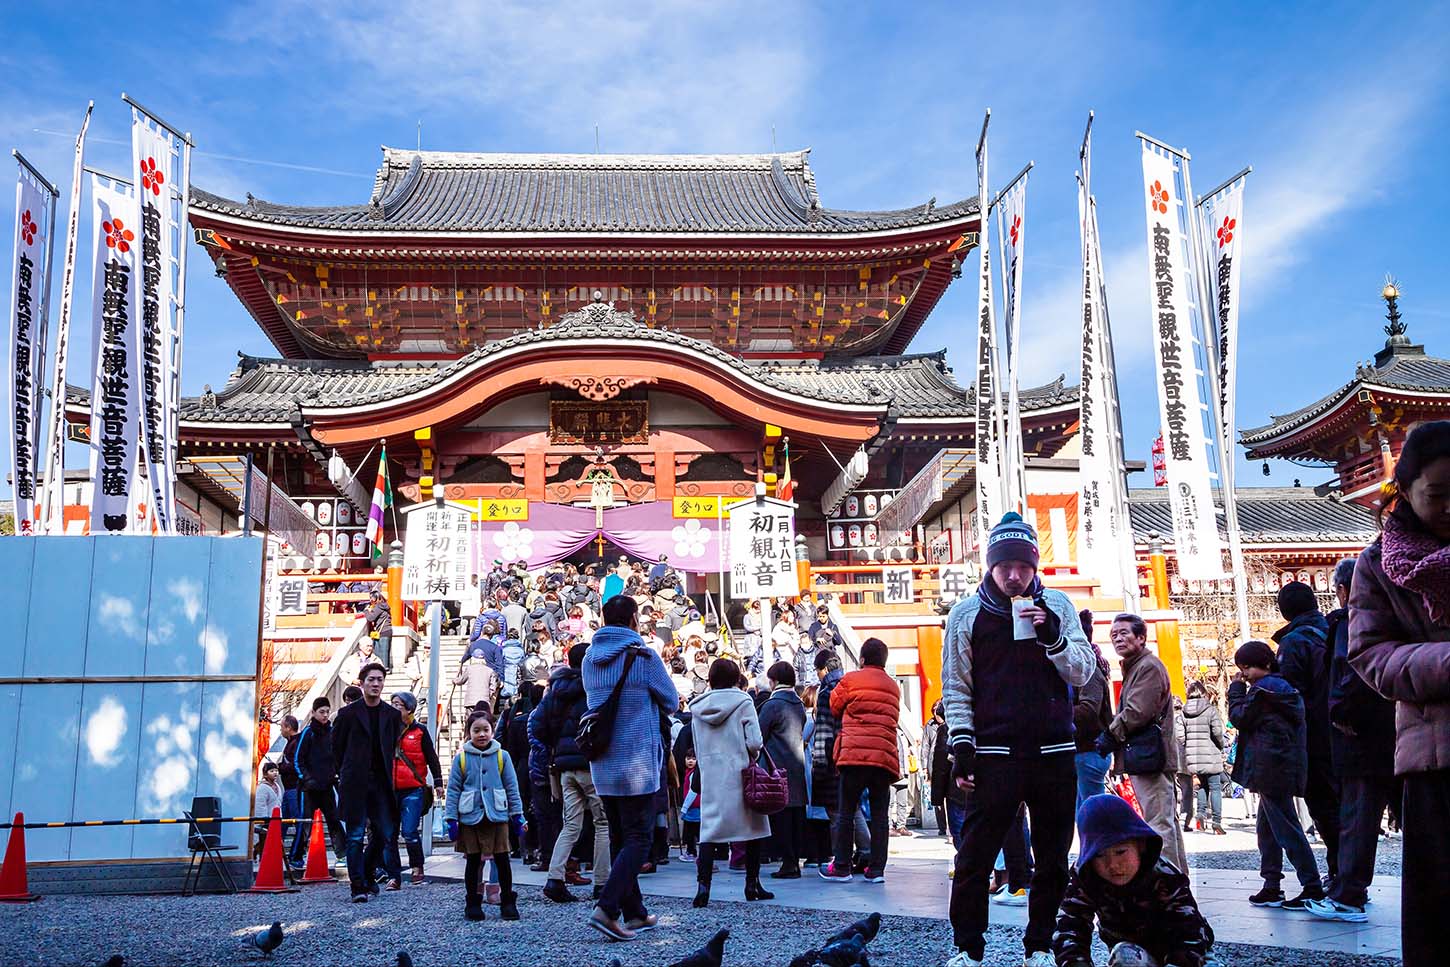 Sightseeing scenery that simply shows the weather in Nagoya in January2